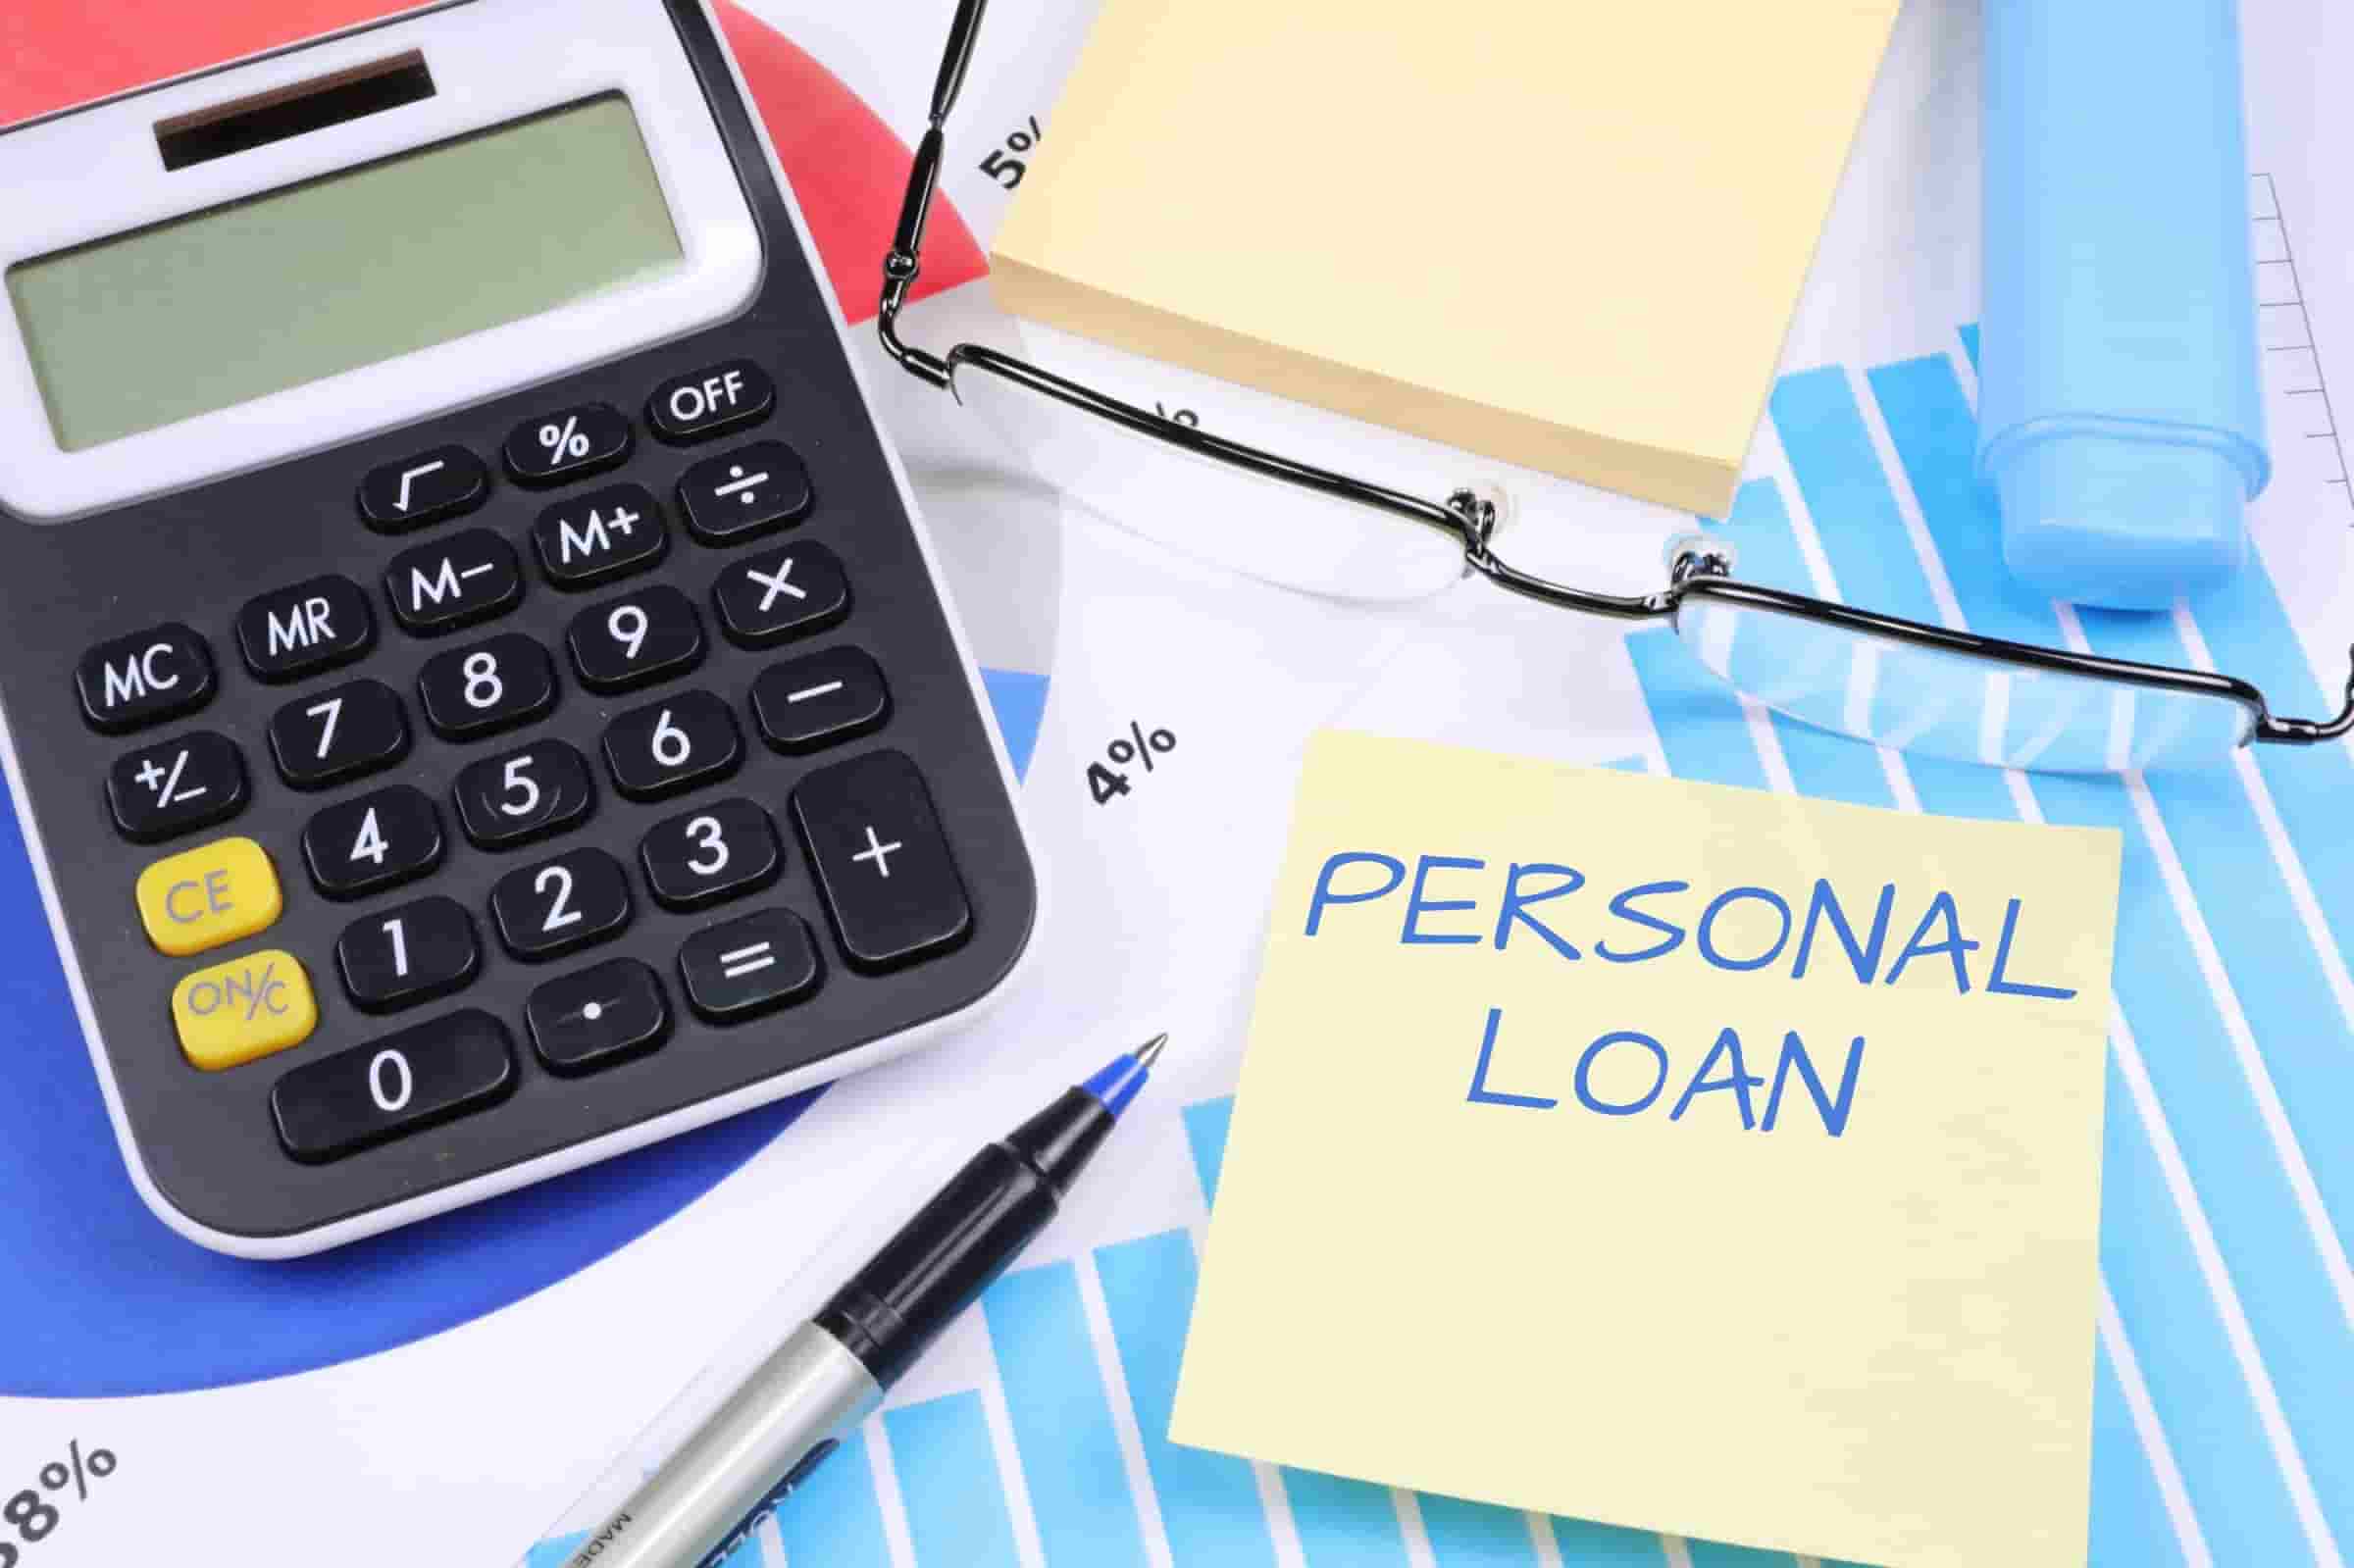 How to Get Personal Loan